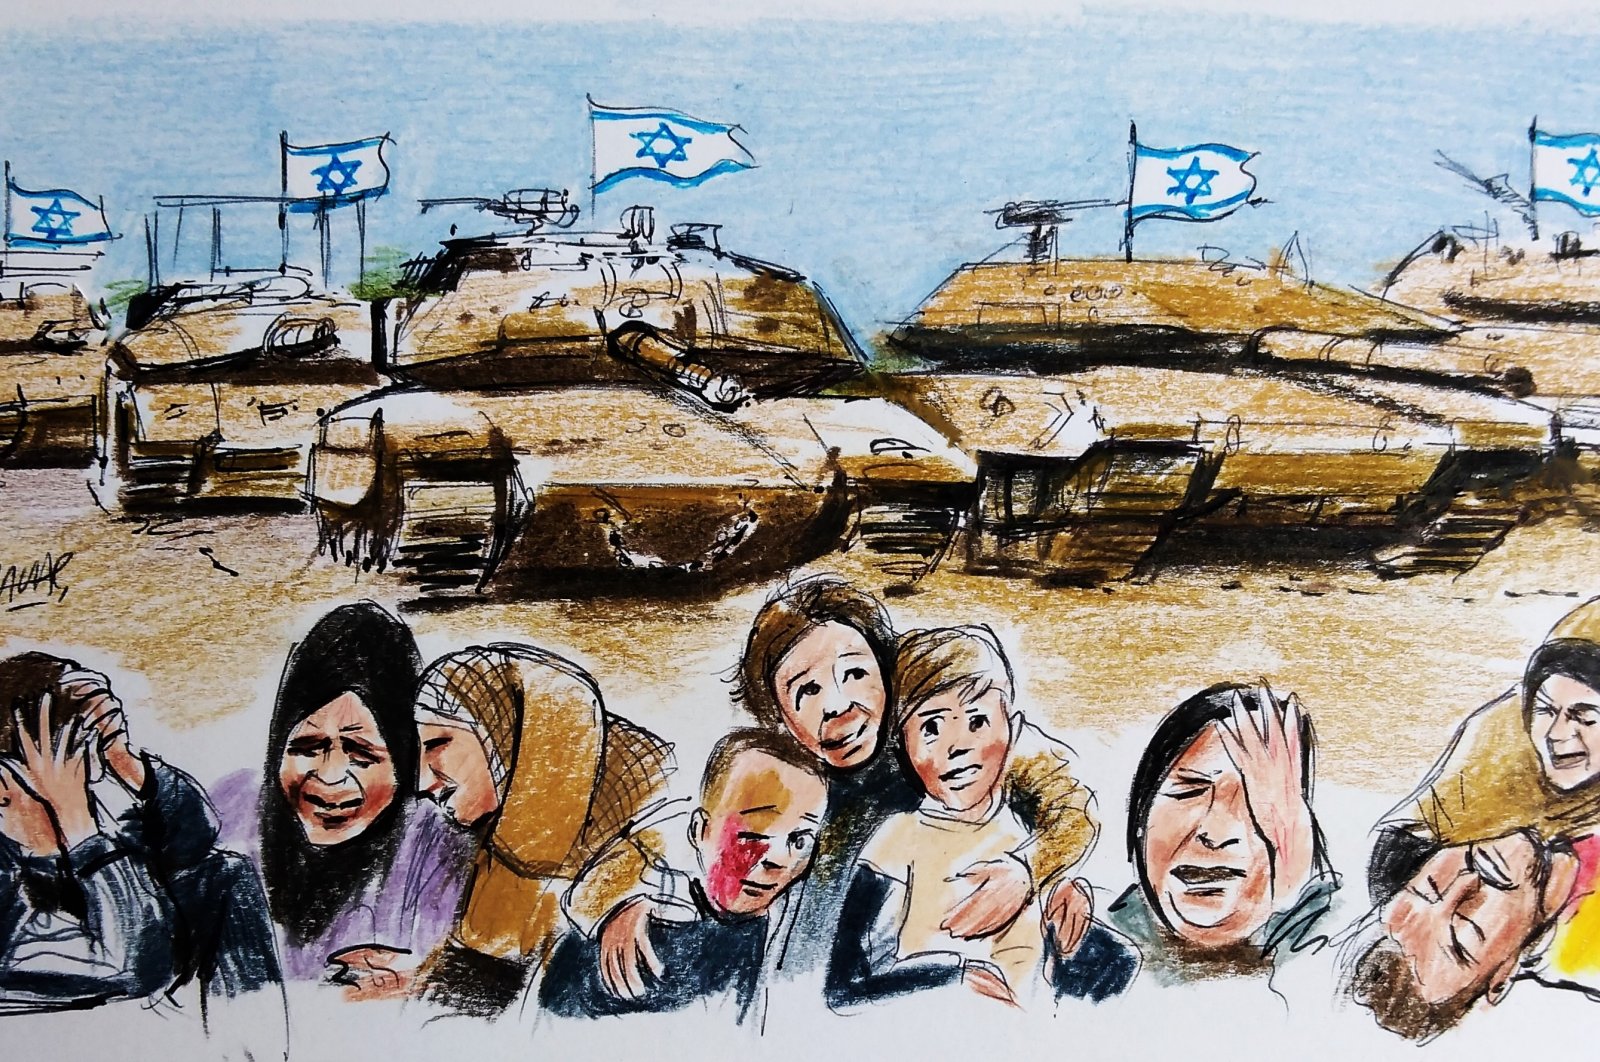 &quot;The present situation in Gaza is truly dire, yet reports have already surfaced that Zionist ministers are considering restricting the flow of aid, under domestic pressure from protesters calling for the blocking of its entry into the strip.&quot; (Illustration by Erhan Yalvaç)